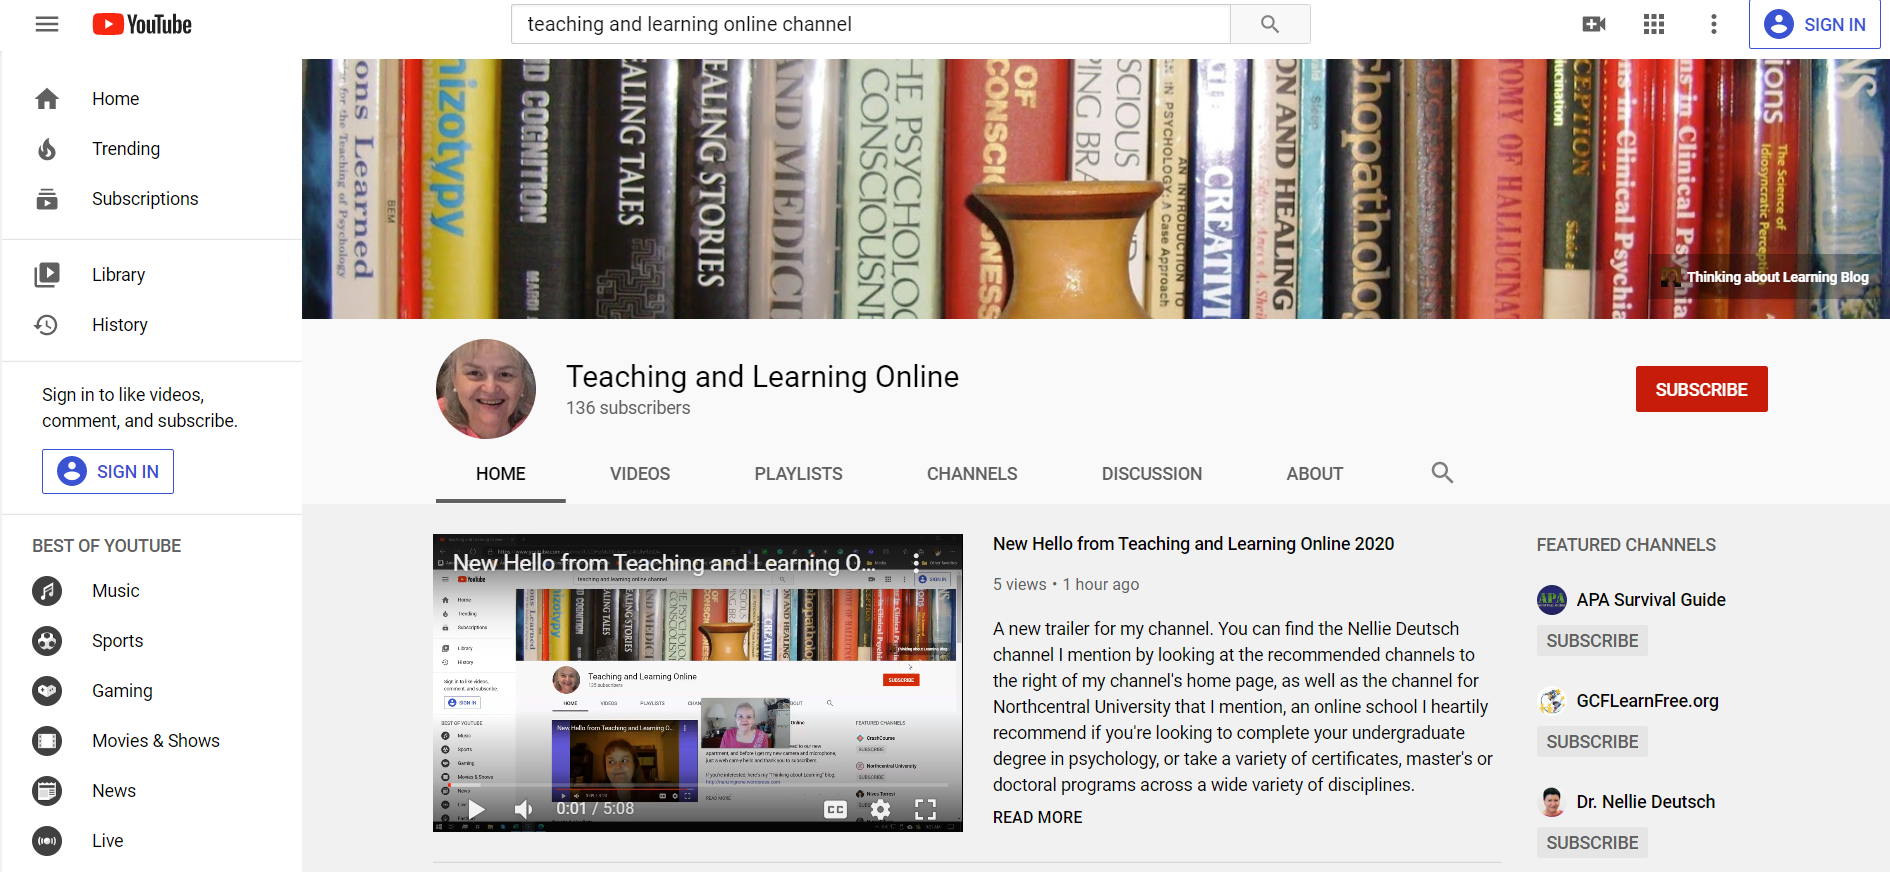 Teaching and Learning Online YouTube Channel with August 2020 Trailer